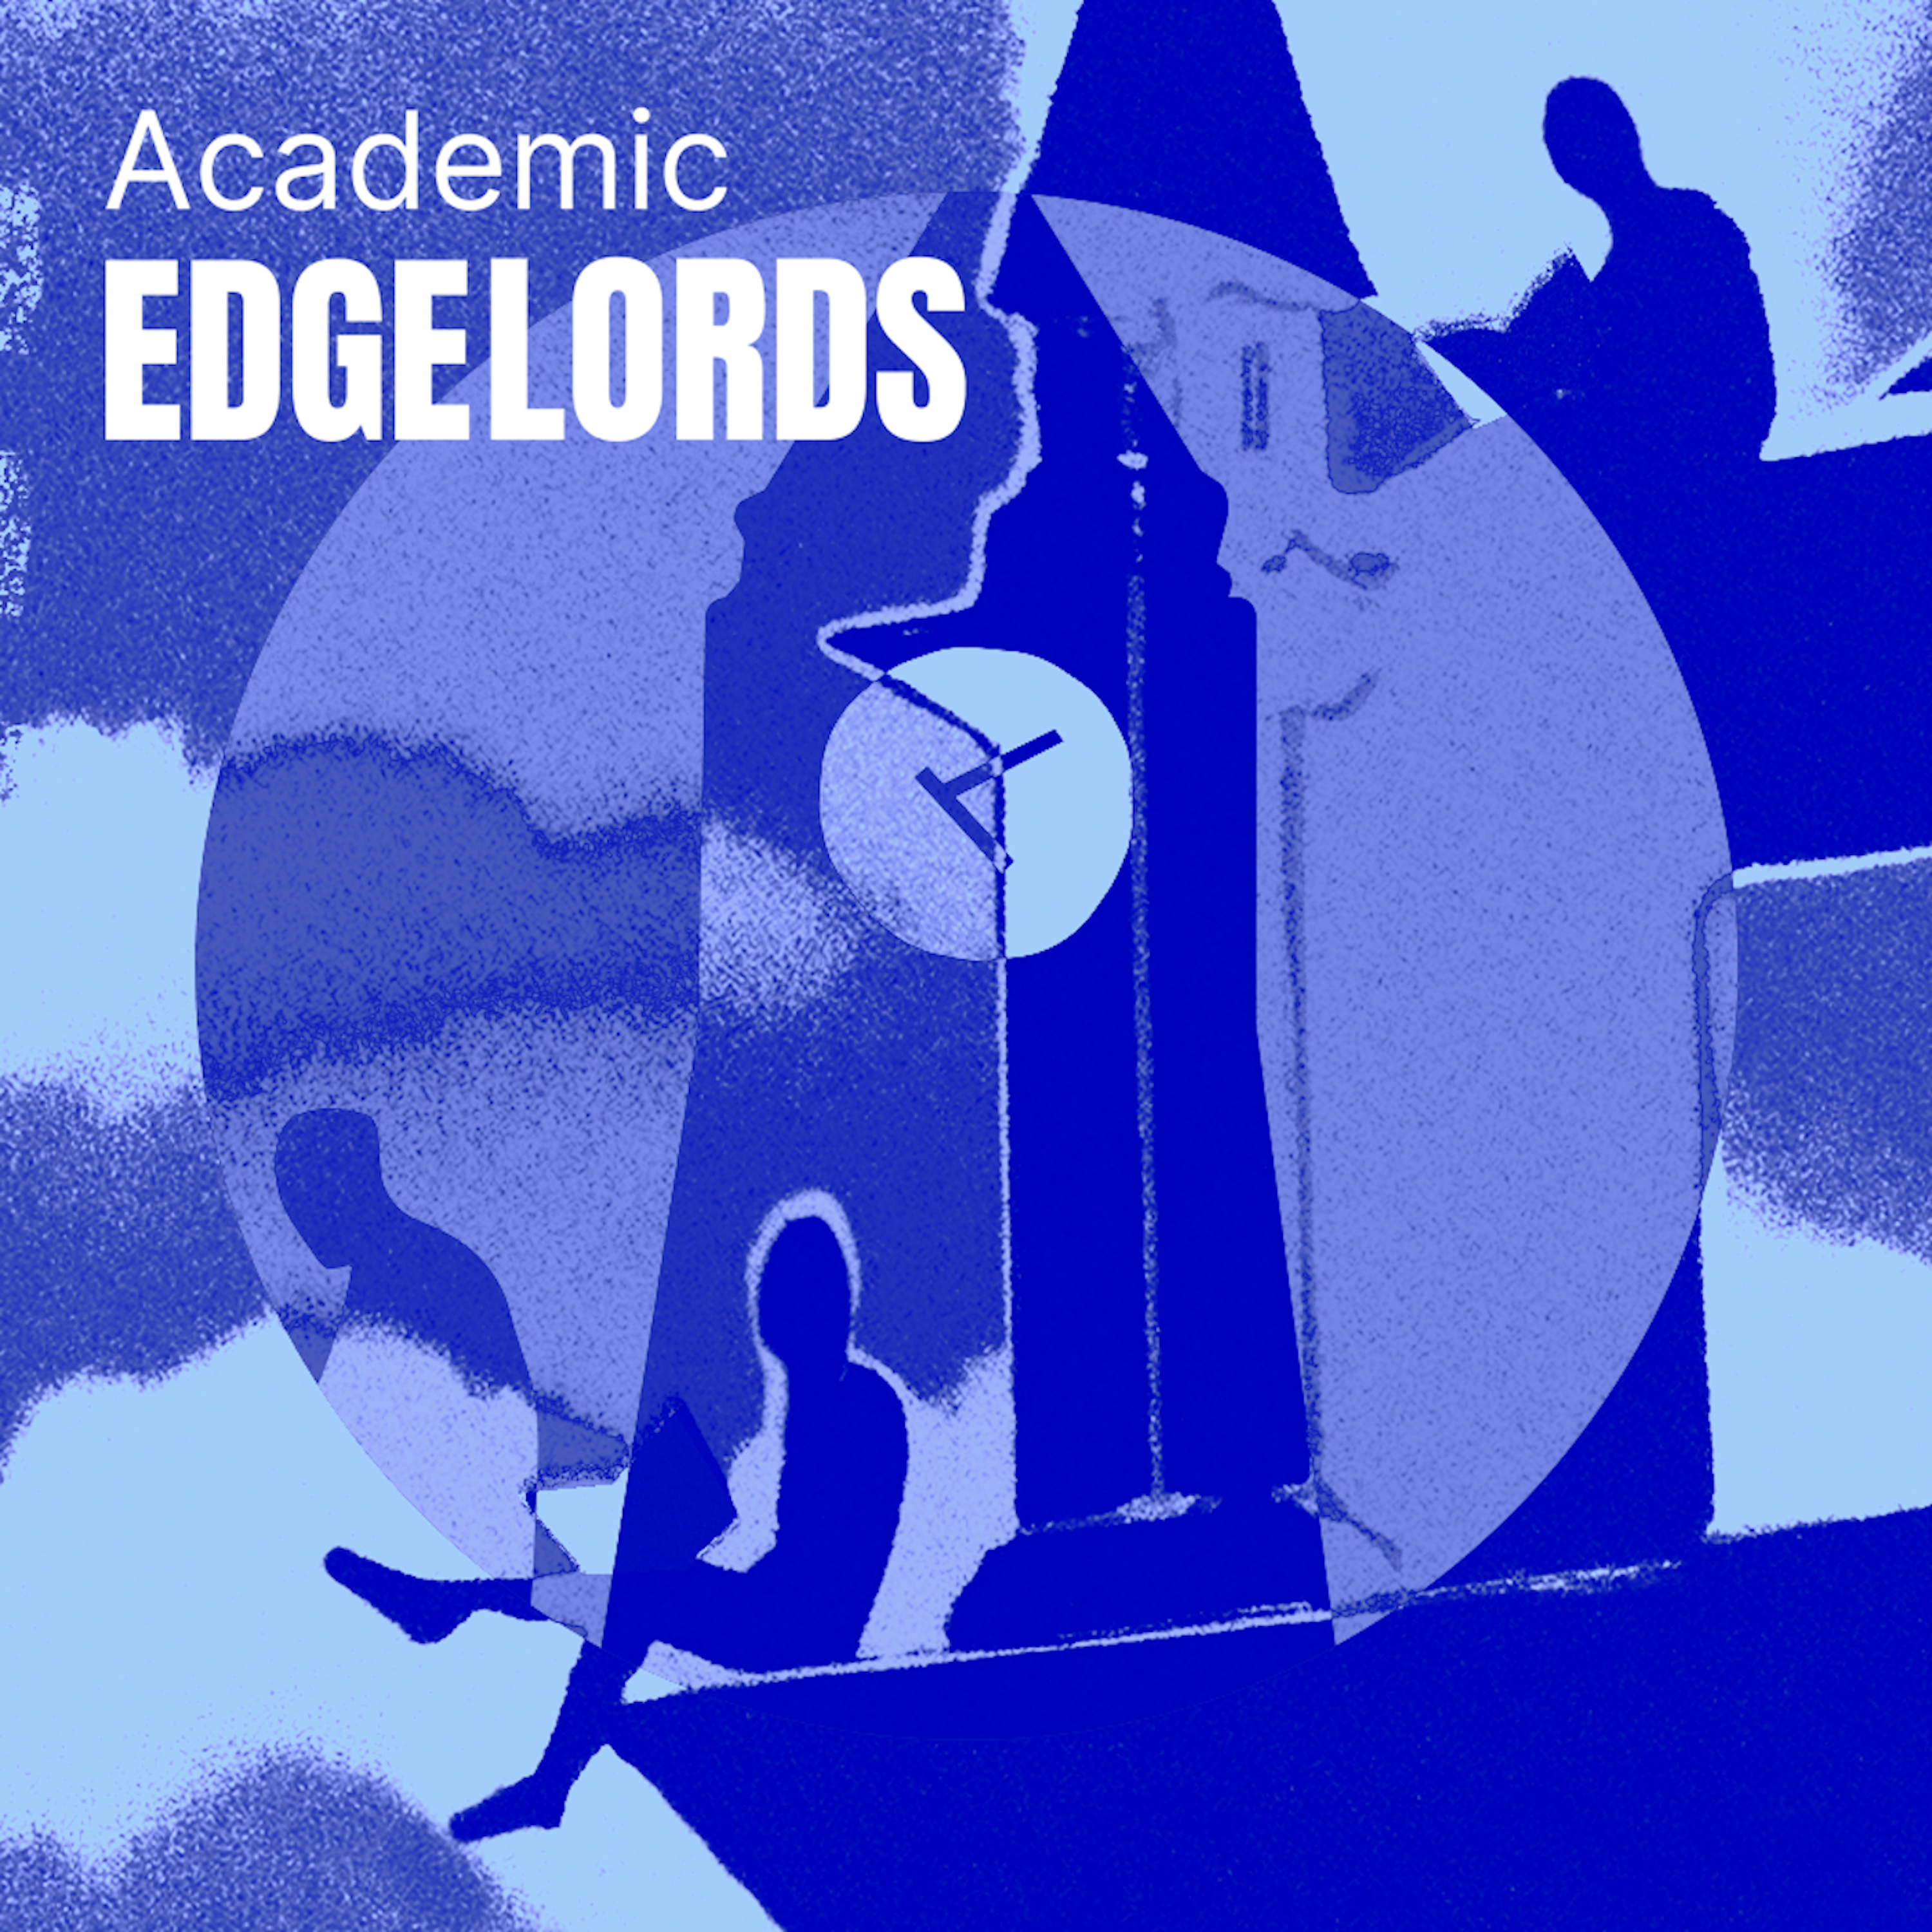 EP1: Are We the Academic Edgelords?